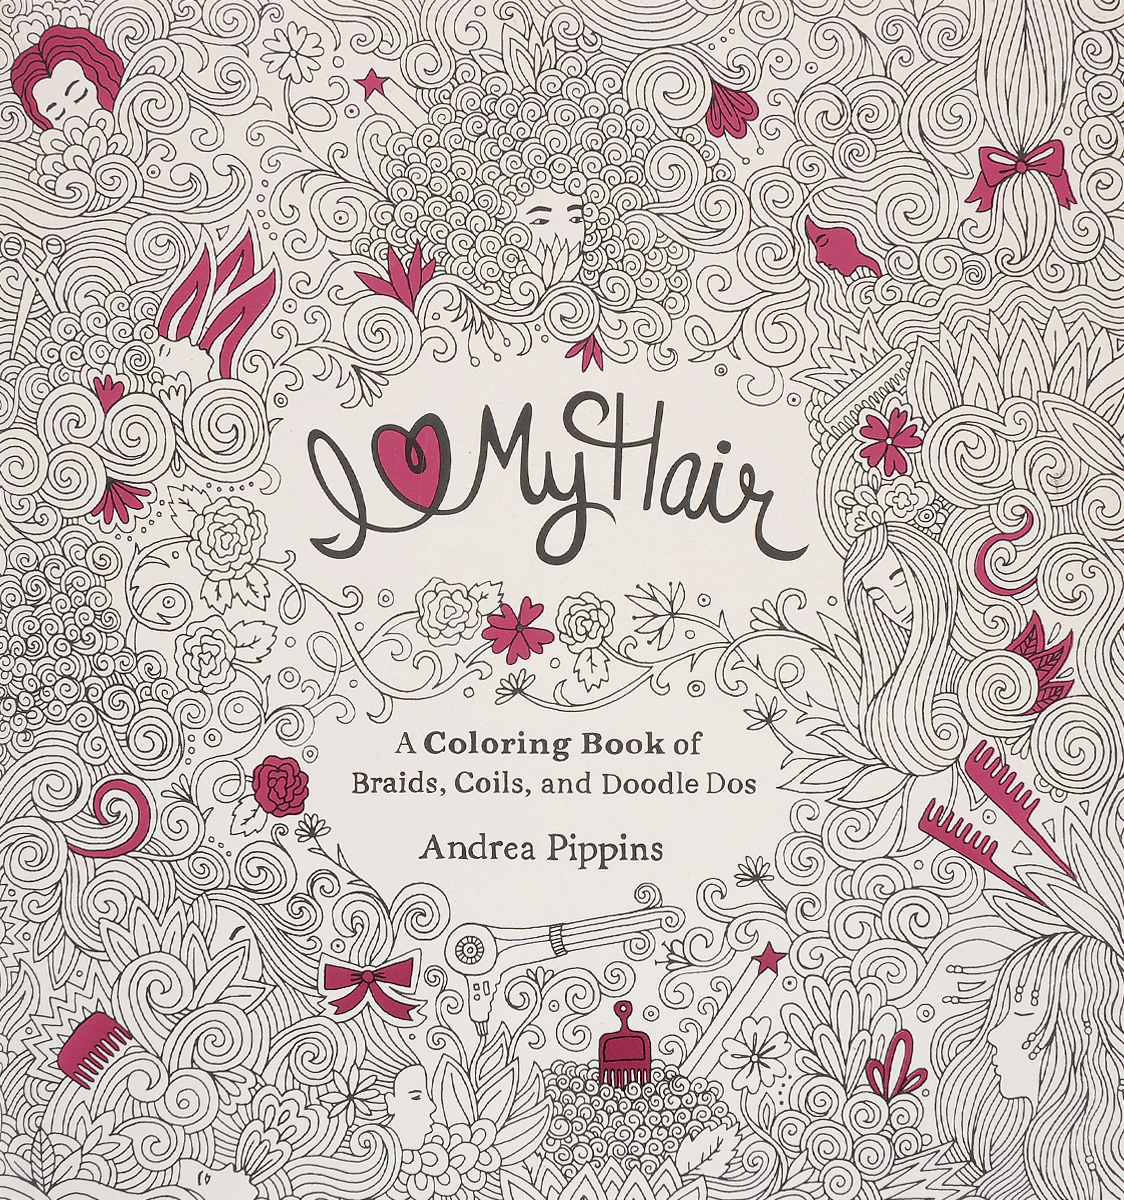 I Love My Hair: A Coloring Book of Braids, Coils and Doodle Dos